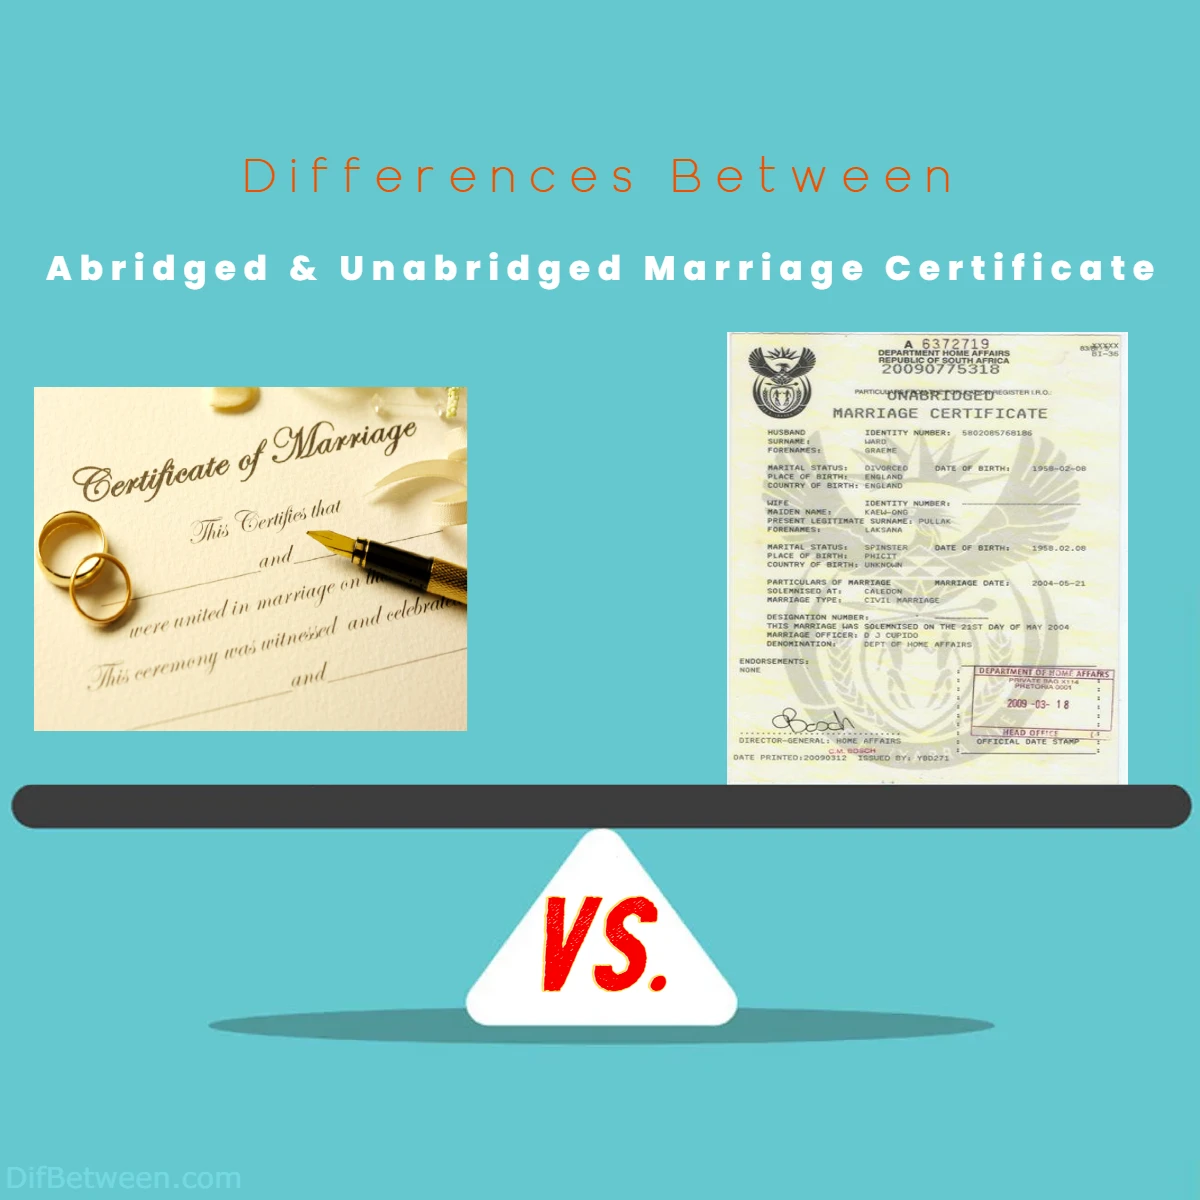 Differences Between Abridged vs Unabridged Marriage Certificate